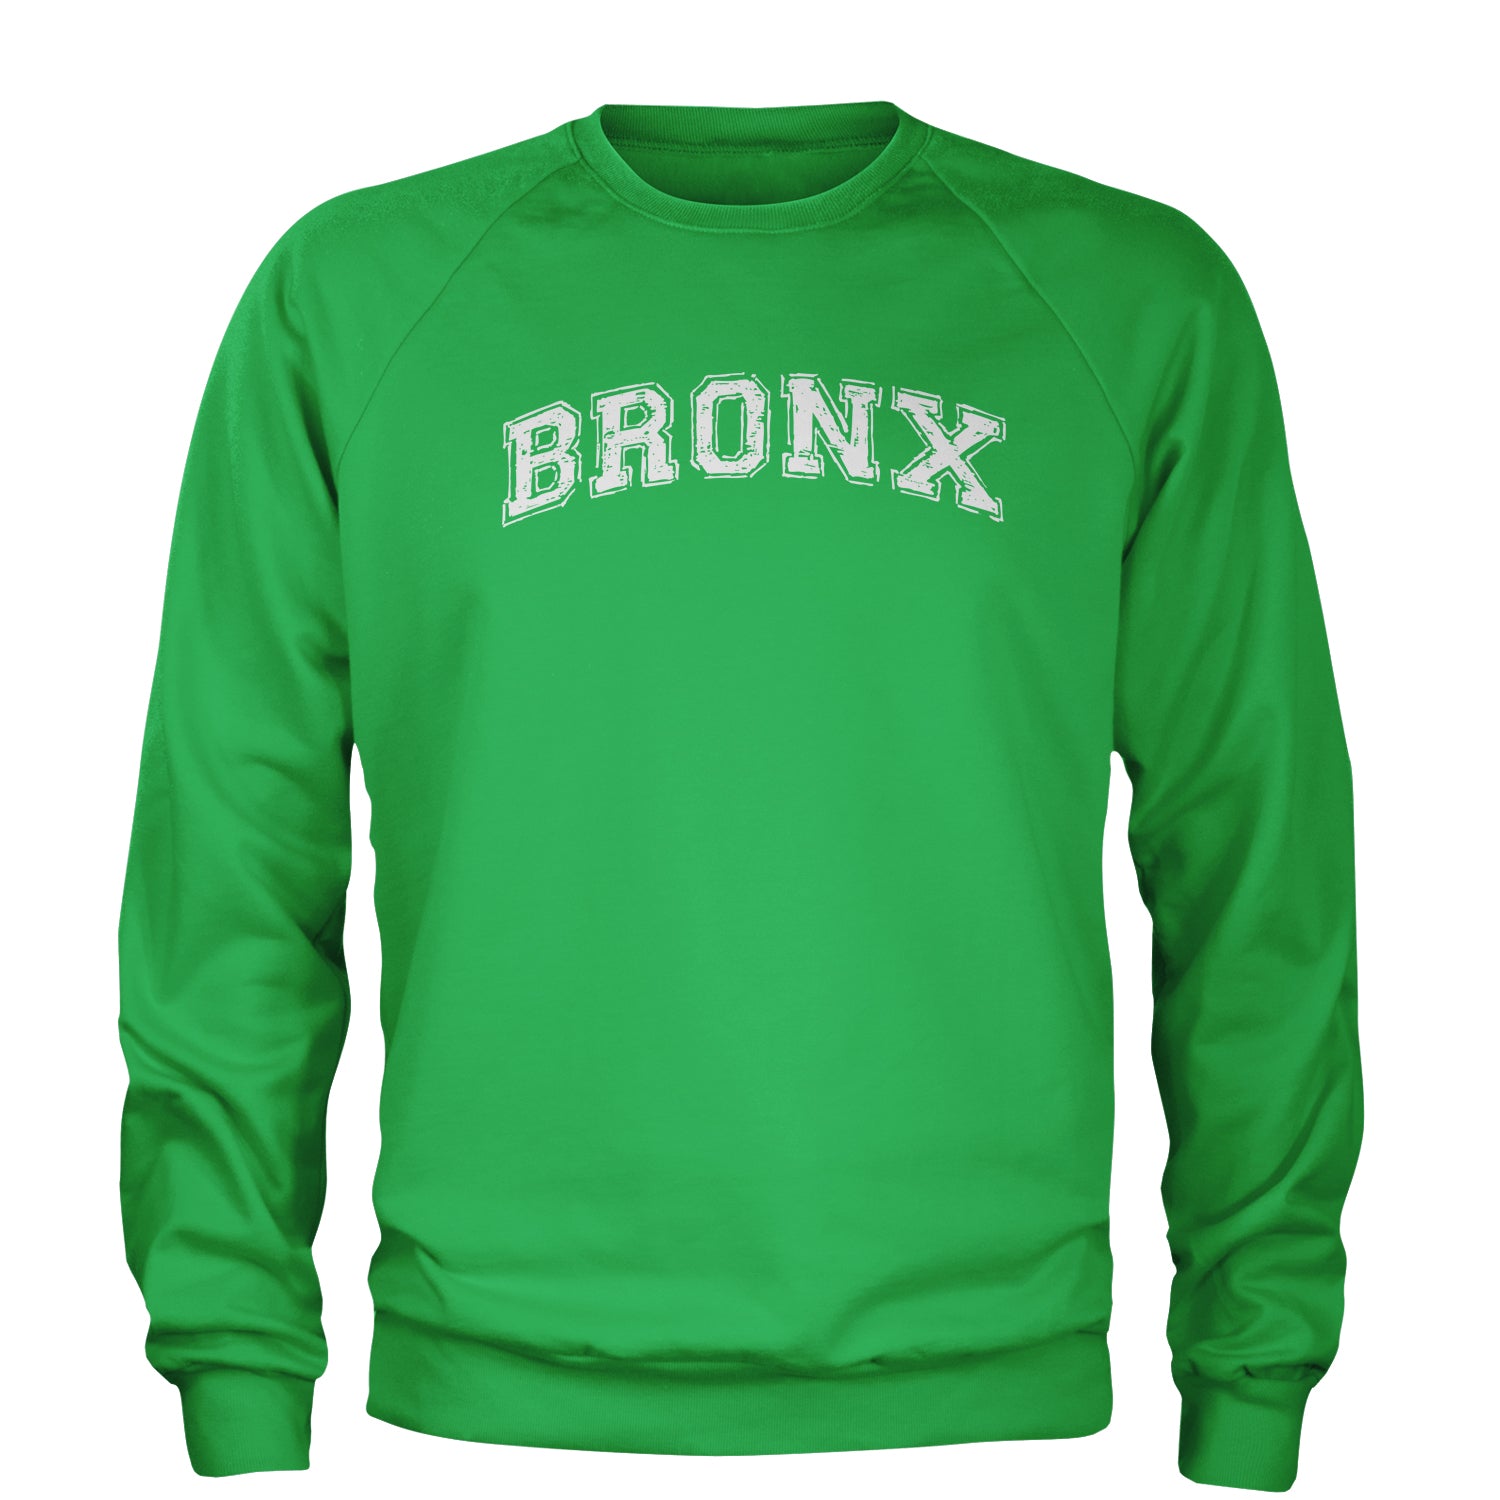 Bronx - From The Block Adult Crewneck Sweatshirt b, cardi, concert, its, Jennifer, lopez, merch, my, party, tour by Expression Tees